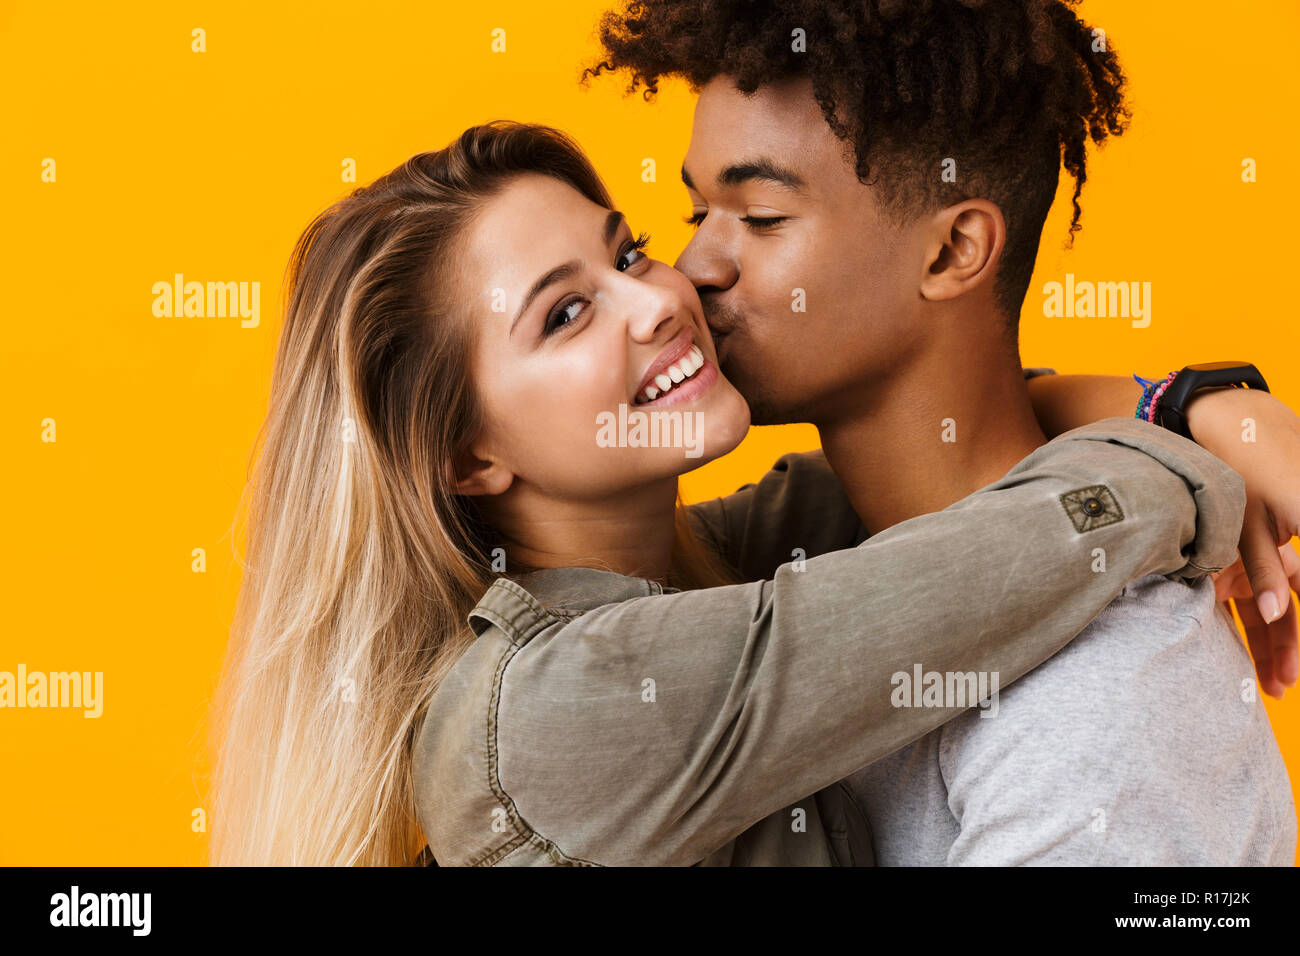 370+ Couple Kissing Romantic Pose Drawing Stock Illustrations, romantic  drawing - thirstymag.com